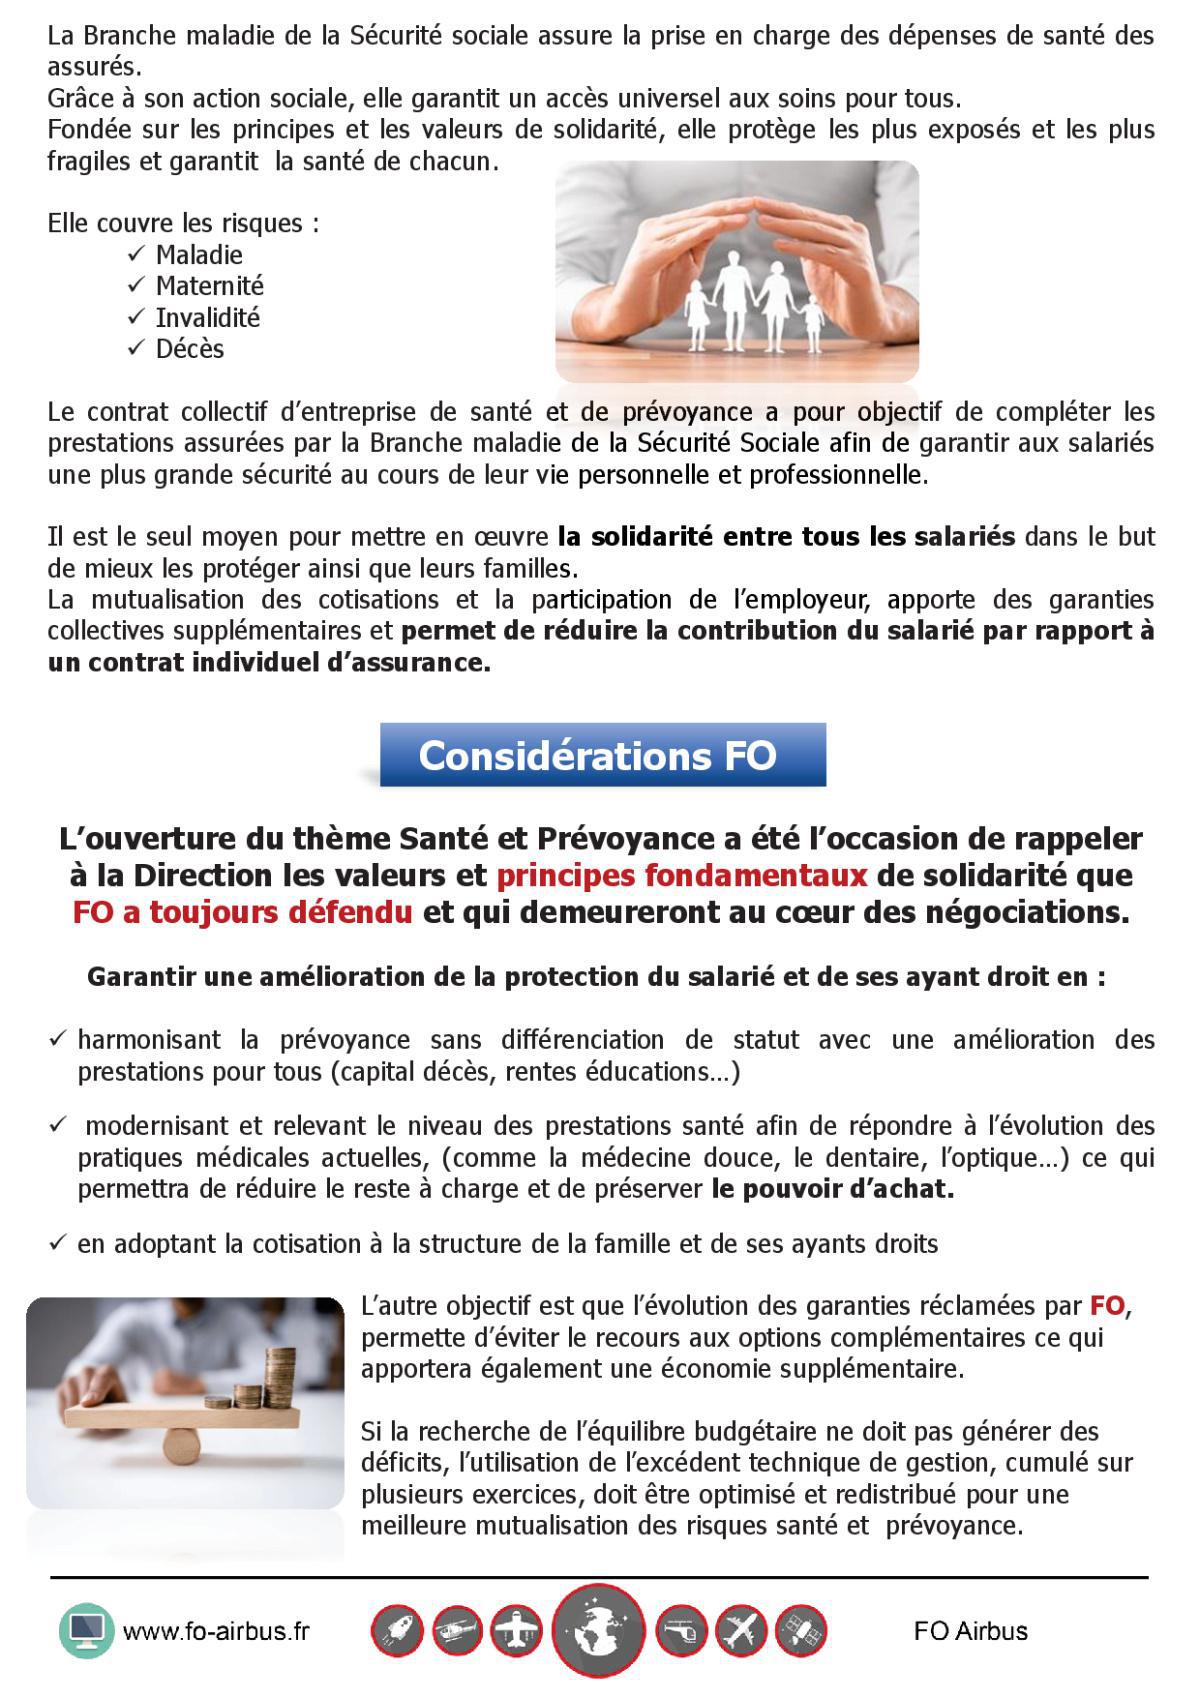 Protection Sociale Groupe - Solidaire et Equitable